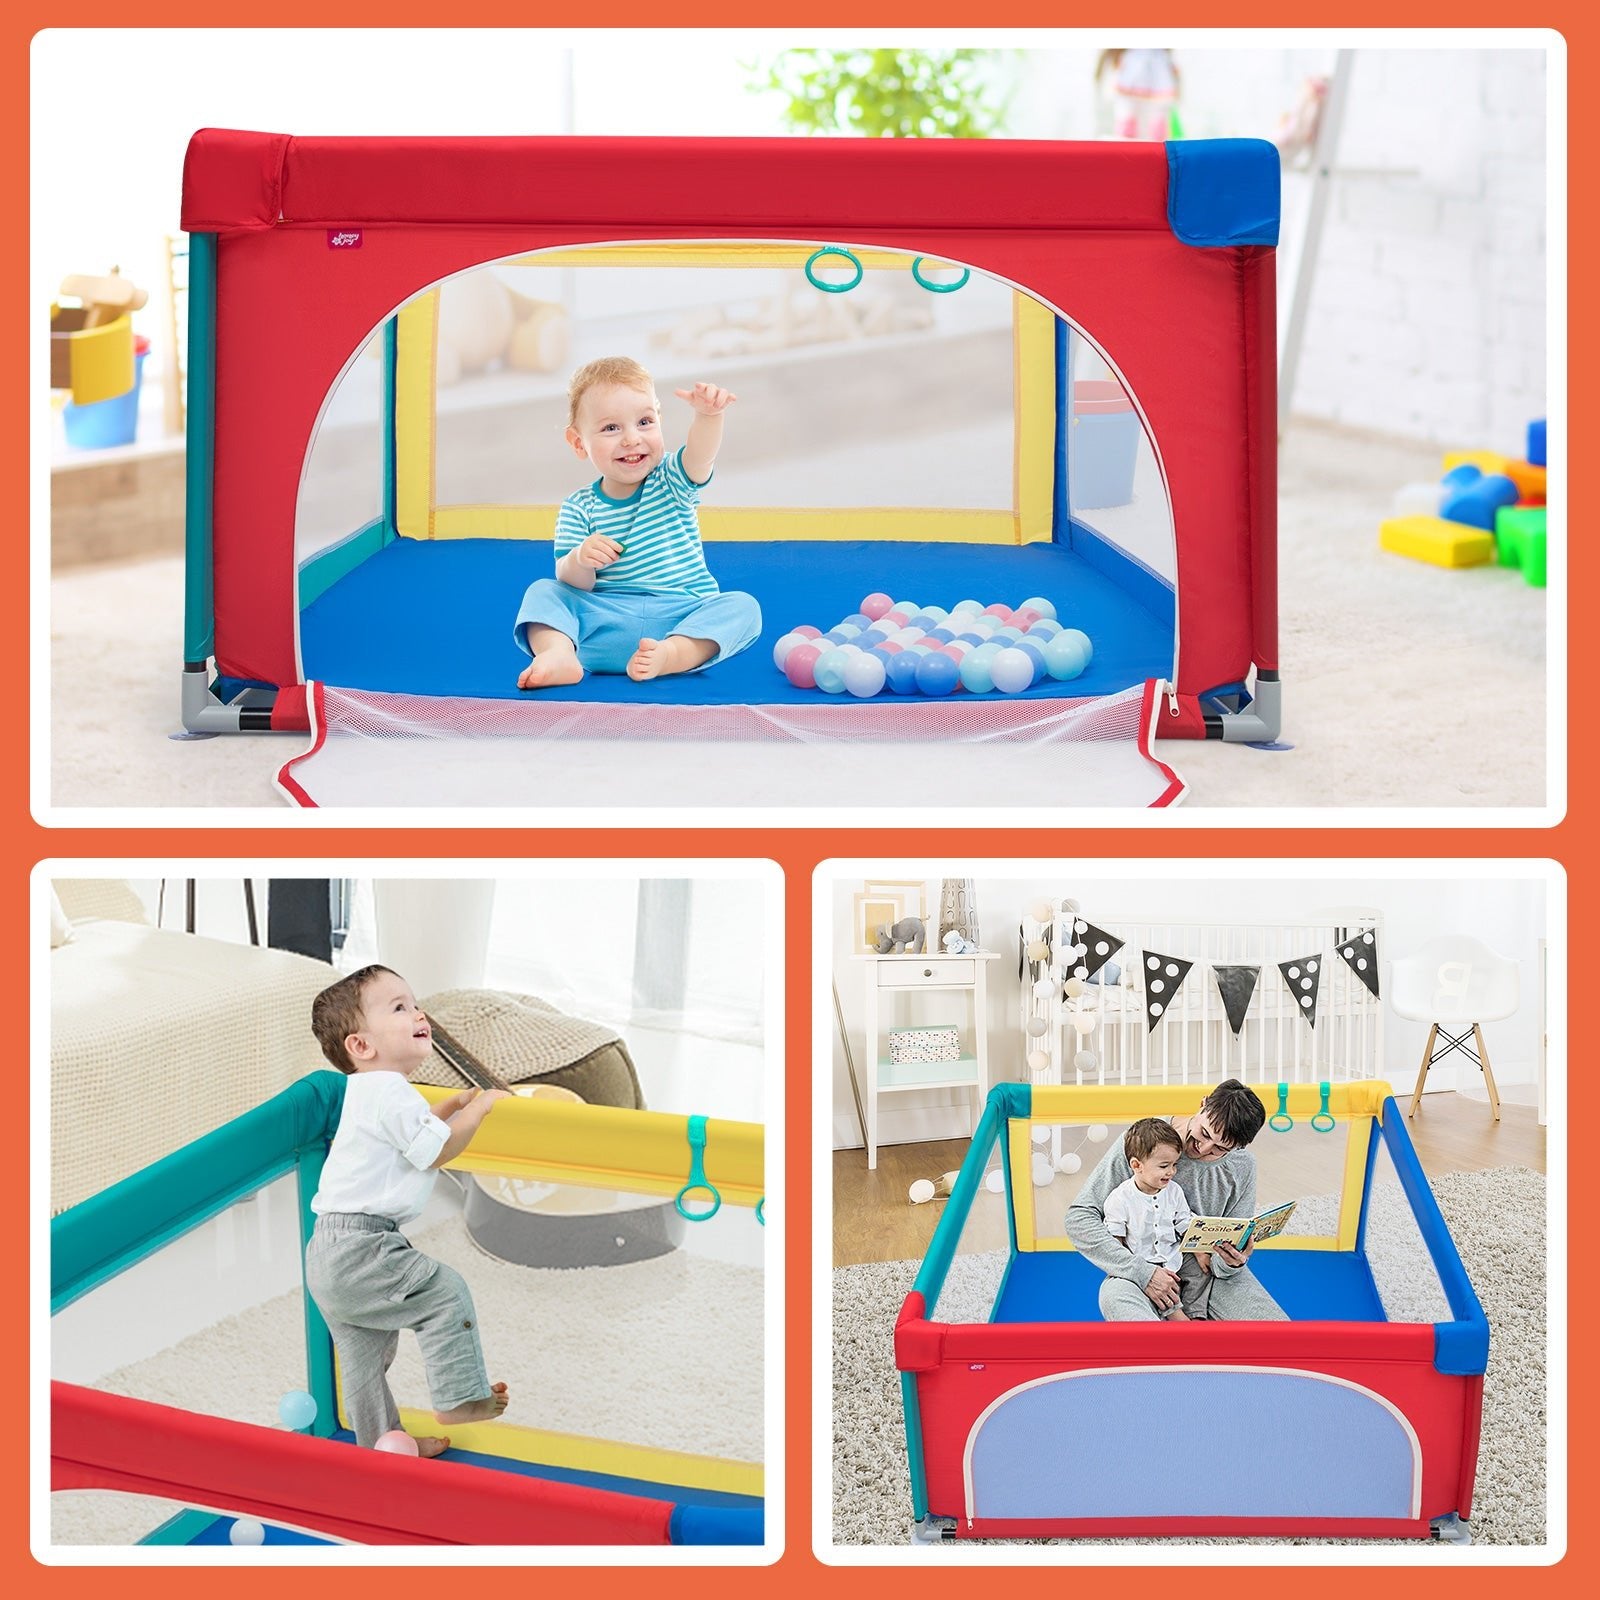 Multicolour Playpen with Safety Activity Fence for Toddlers: Includes 50 Ocean Balls